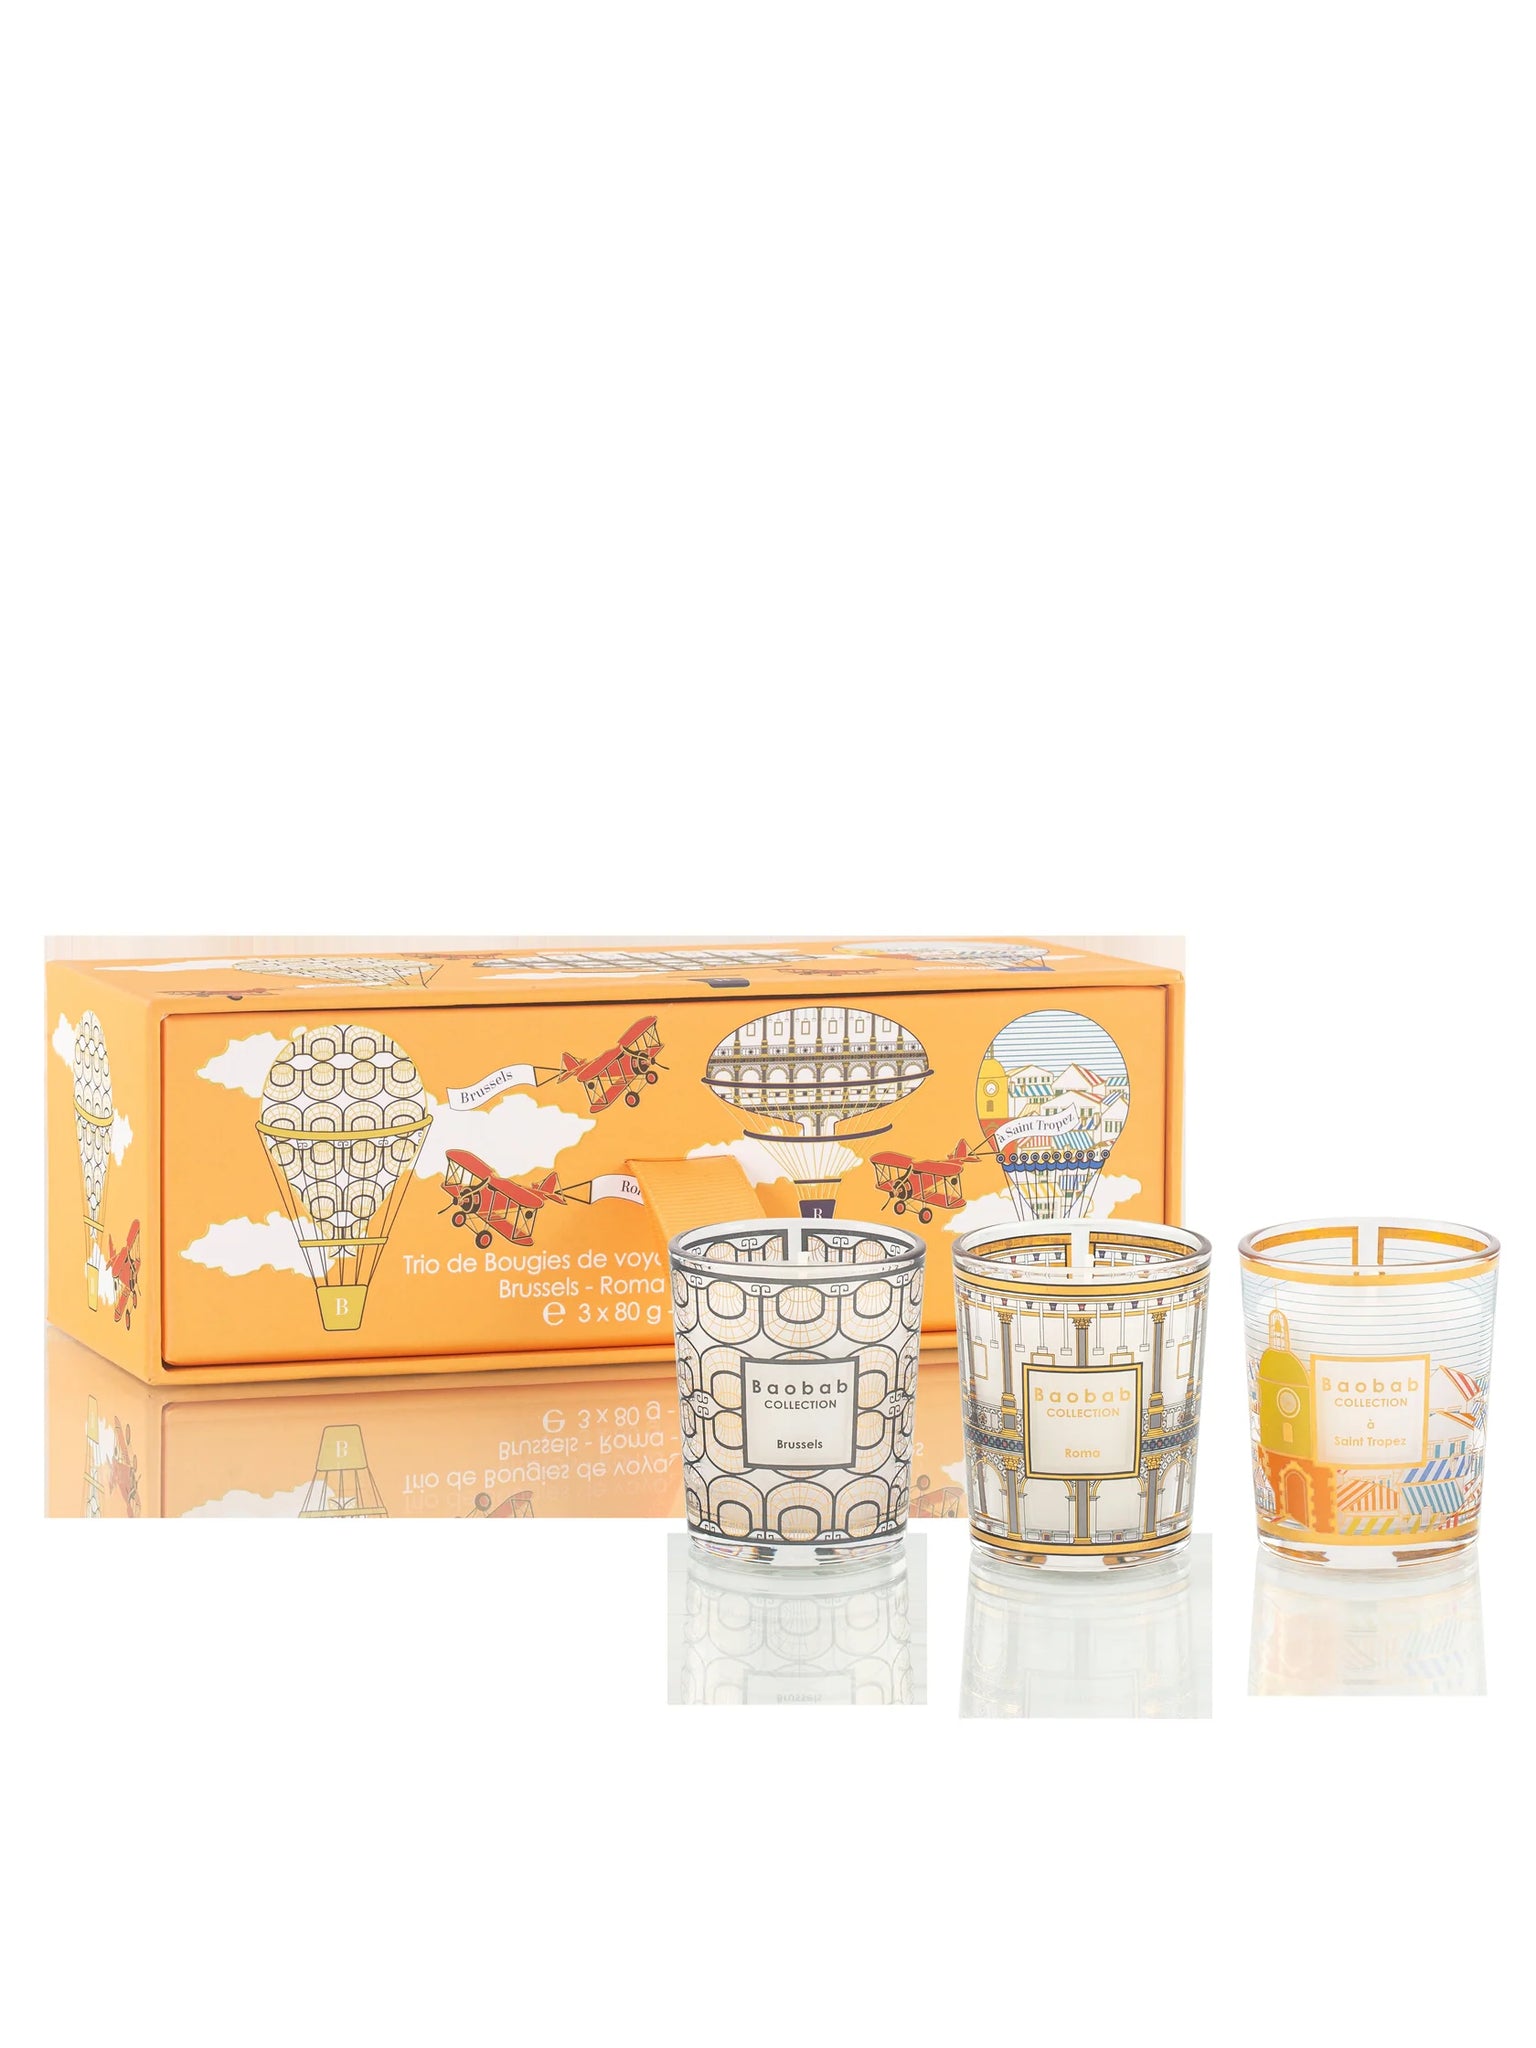 Trio Travel Candles Brussels Roma St Tropez BAOBAB